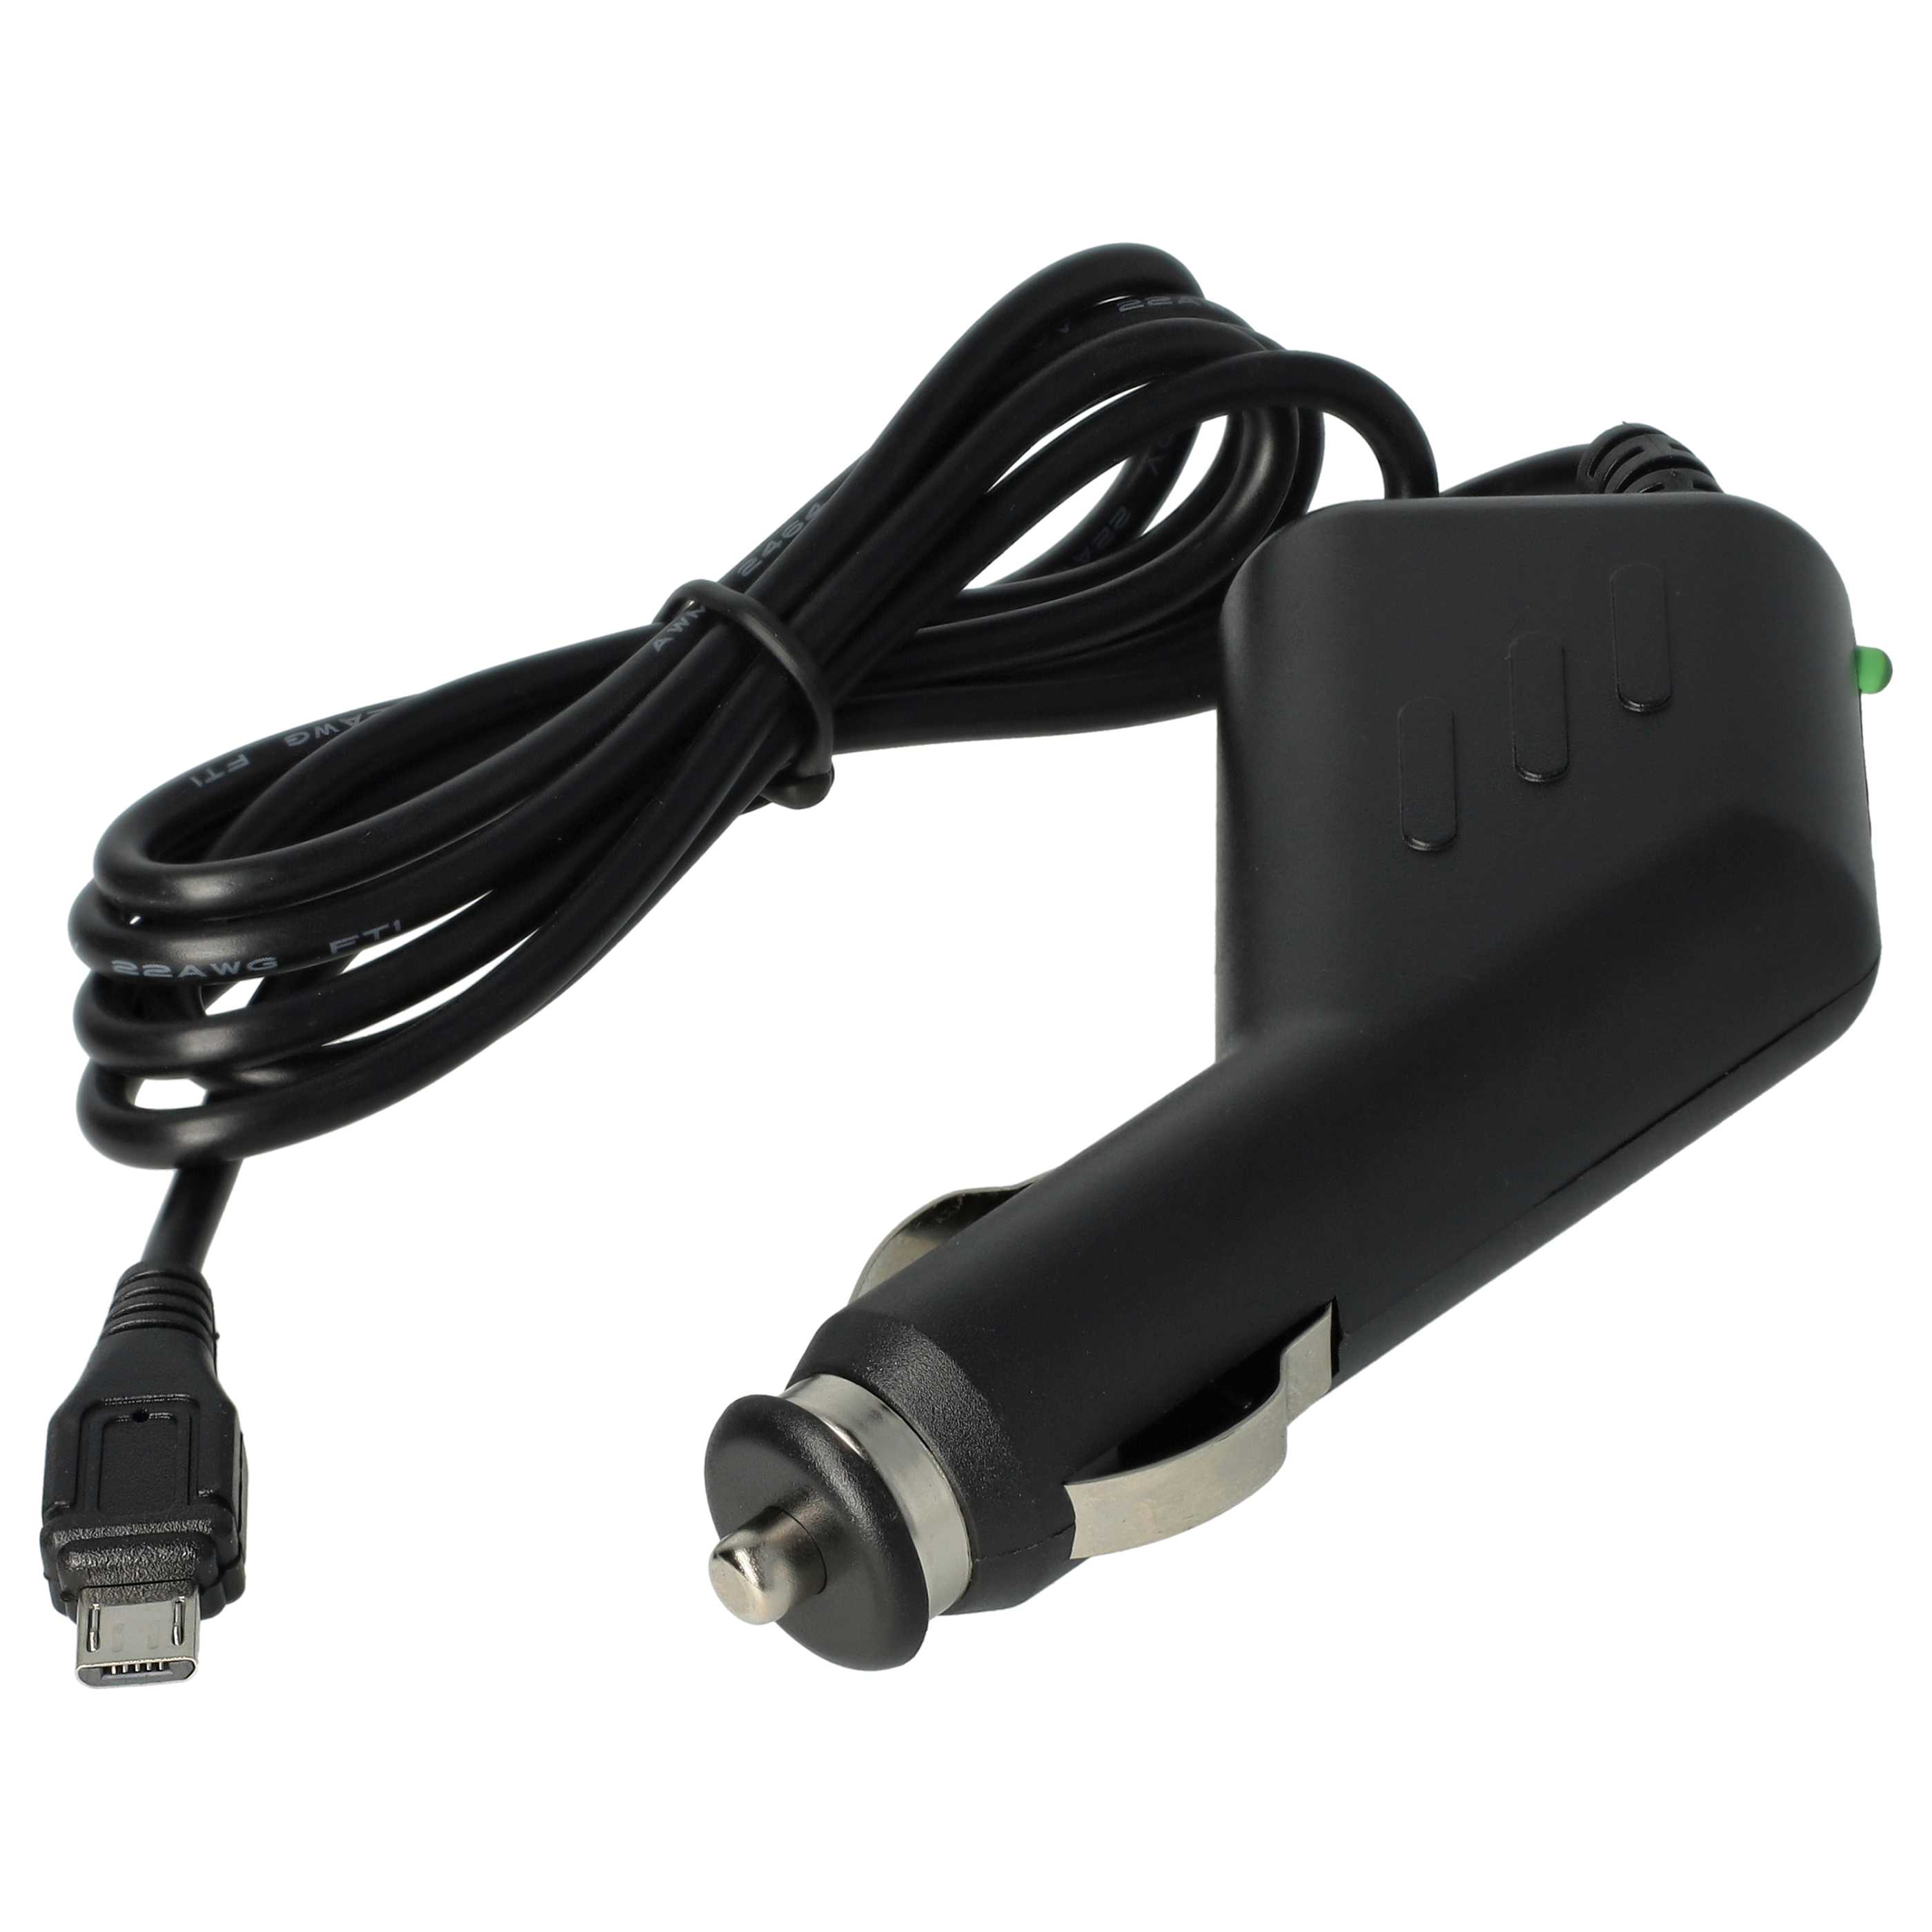 Micro-USB Car Charger Cable 2.0 A suitable for C150 Bea-fonDevices like Smartphone, GPS, Sat Navs